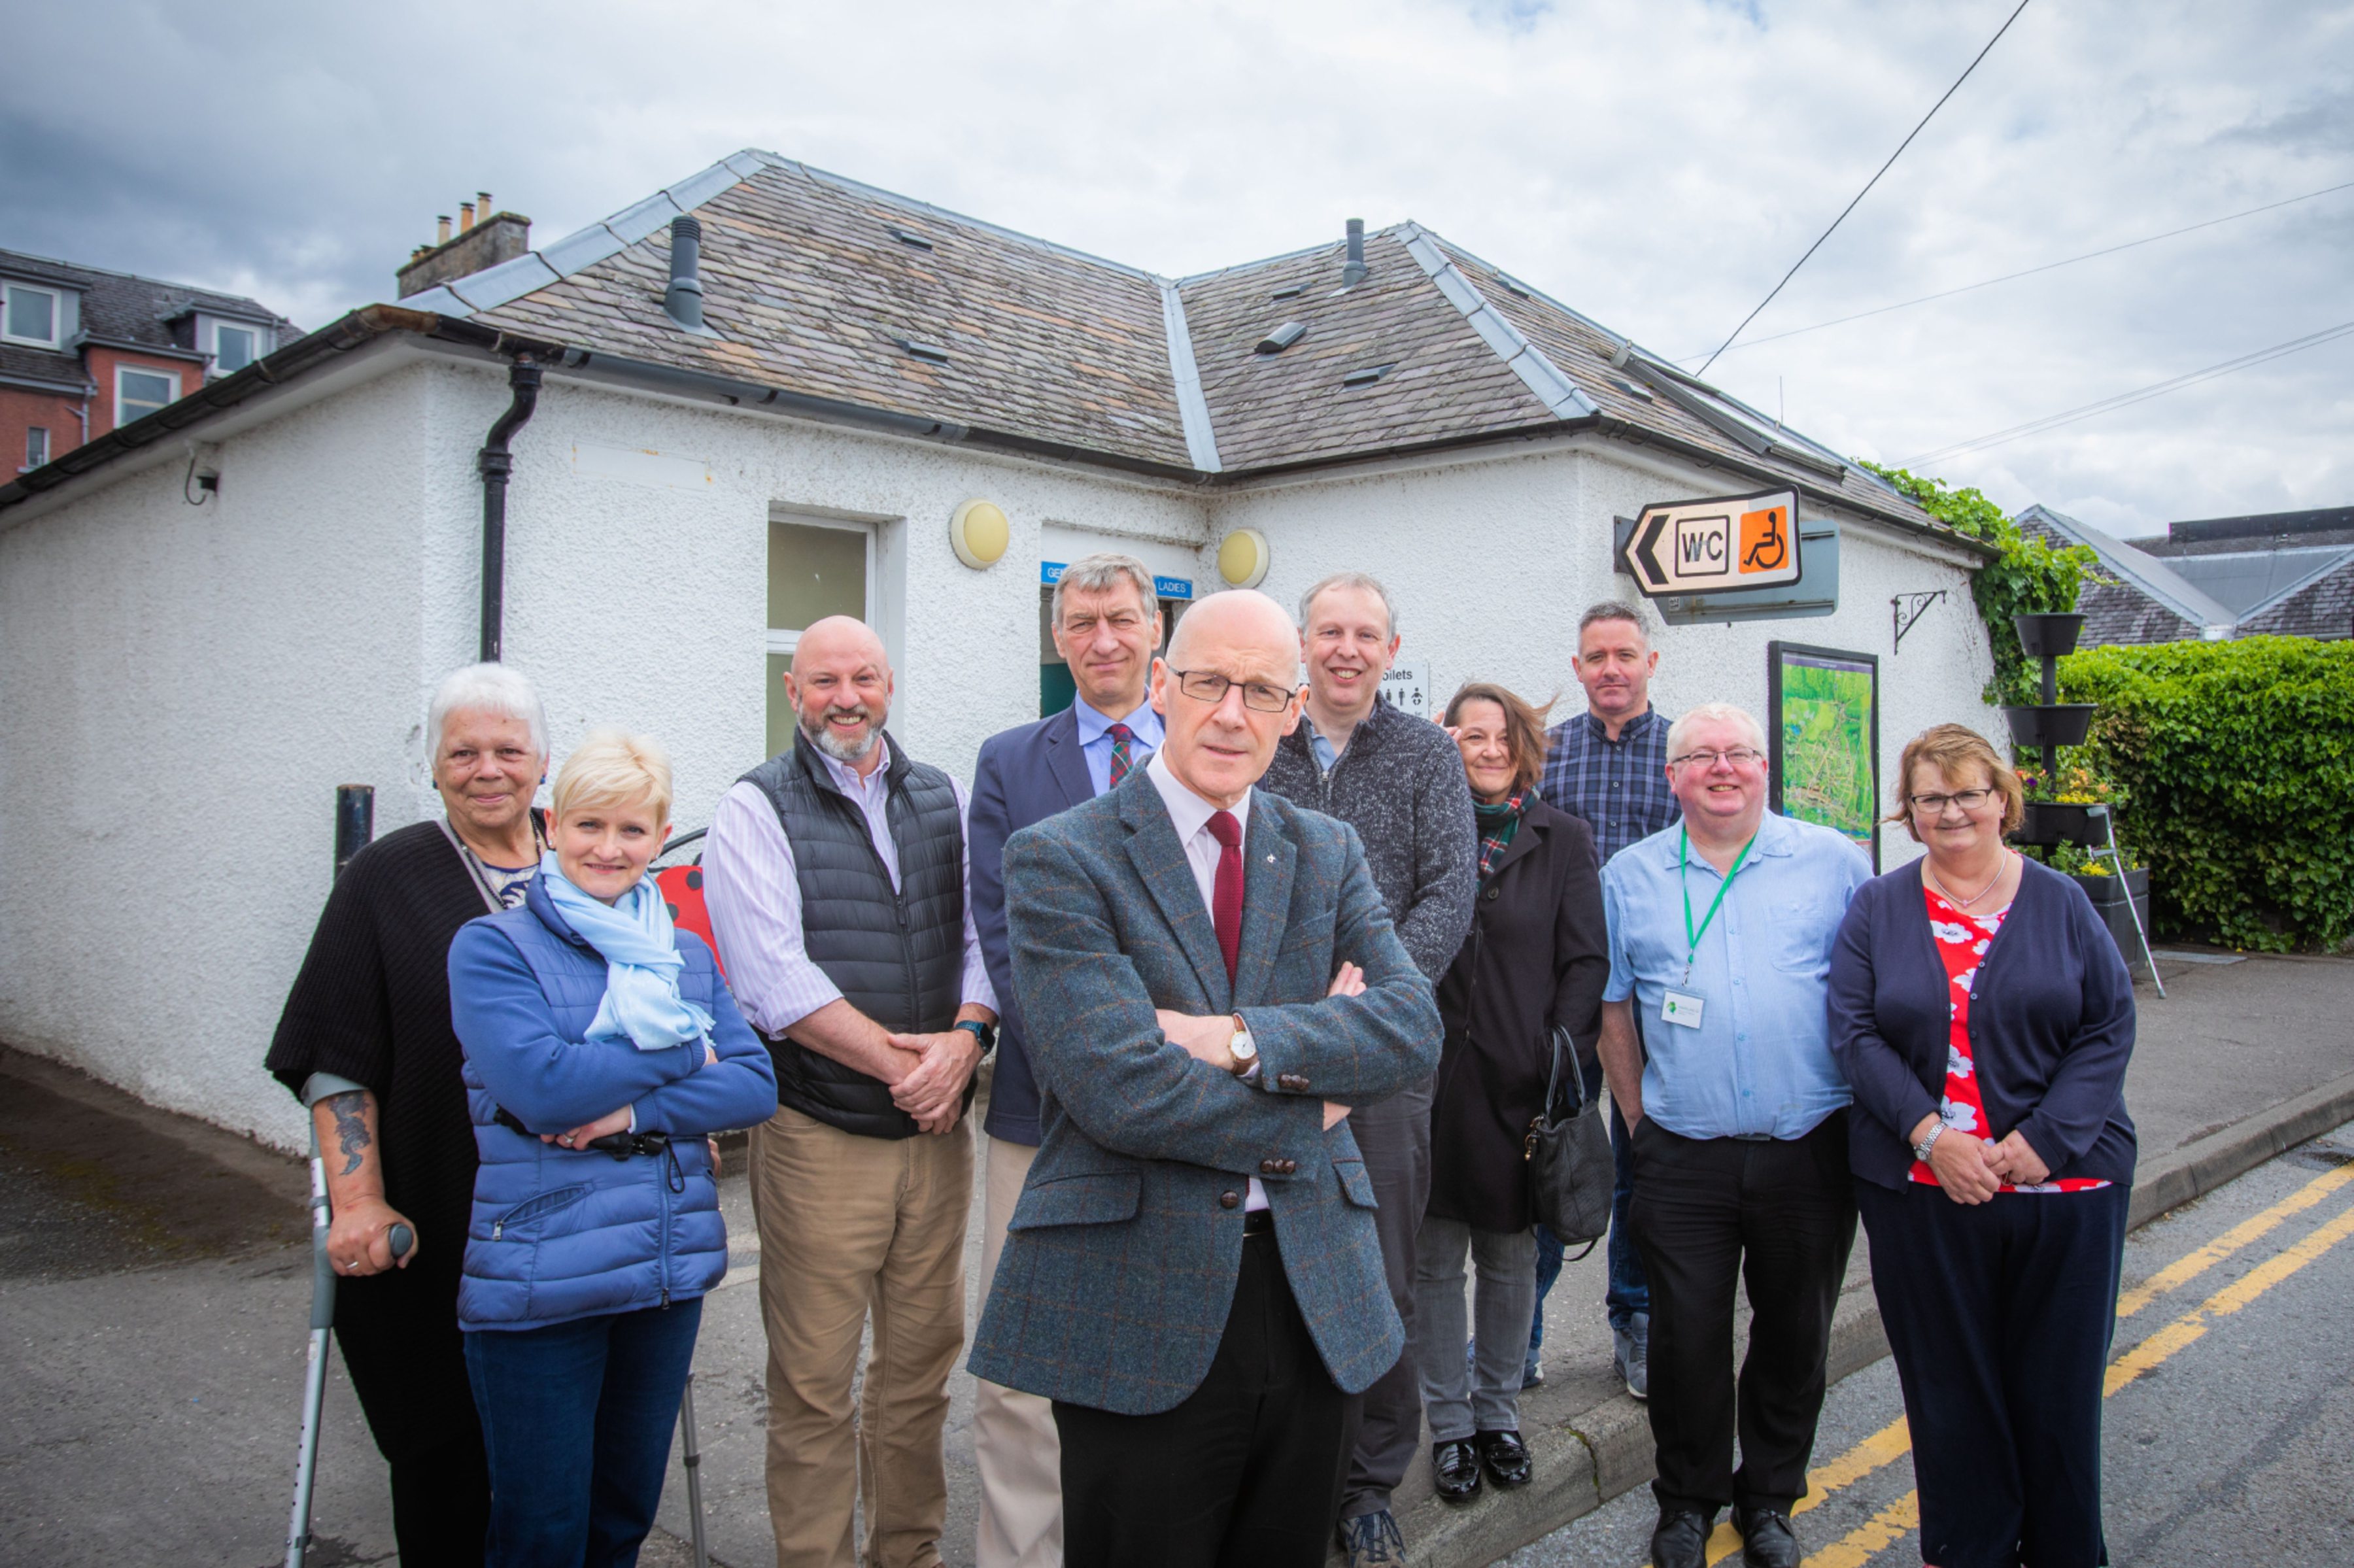 John Swinney MSP (front) and Councillor Mike Williamson (behind) meeting local business owners, members of Community Council and local residents to discuss their concerns. Public Toilets, West Lane, Pitlochry.